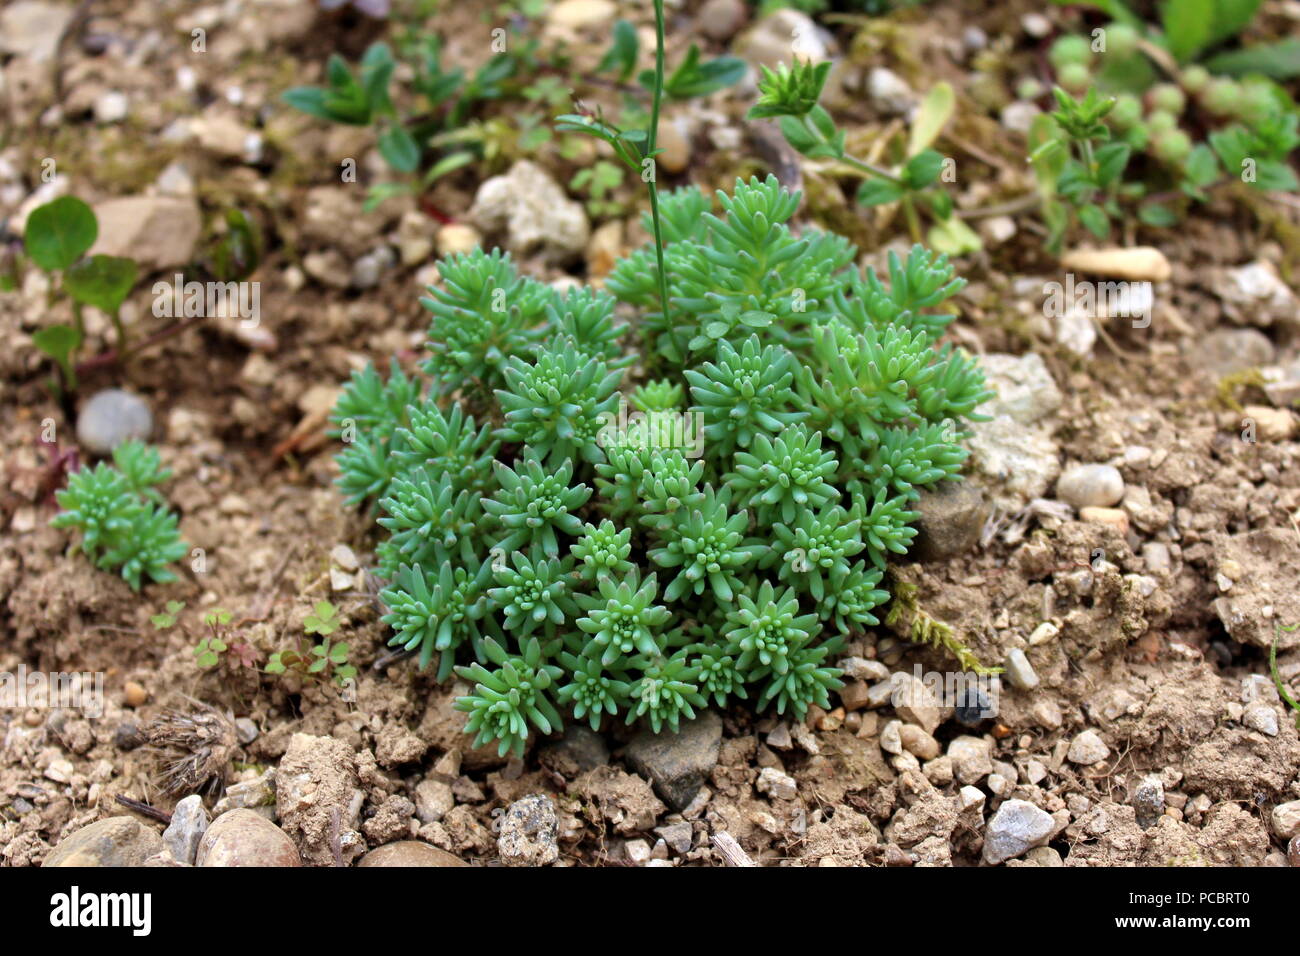 Sedum or Stonecrop hardy succulent ground cover perennial green plant with thick, succulent leaves, fleshy stems and clusters of star-shaped flowers g Stock Photo